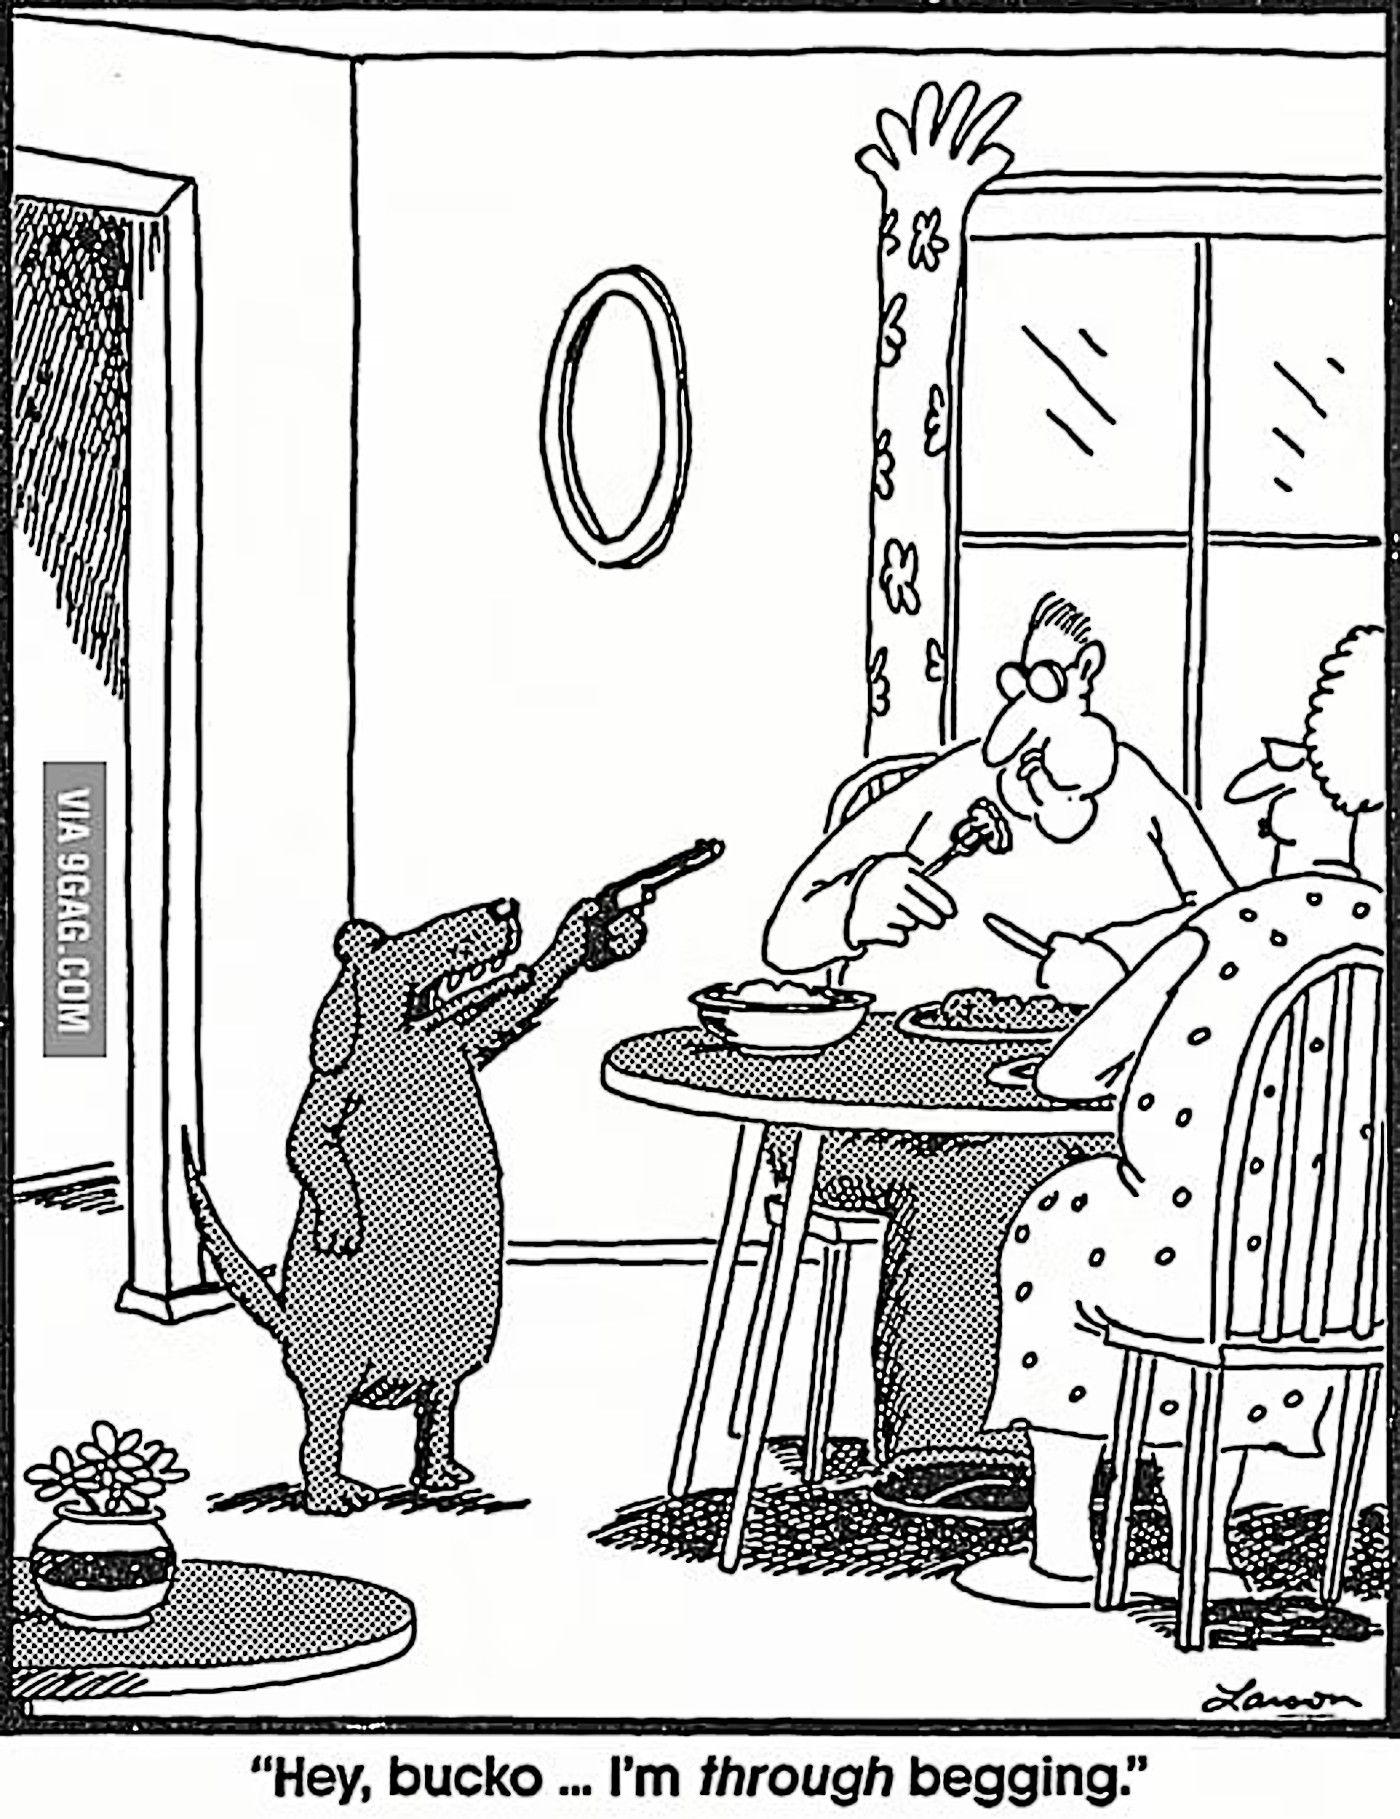 Far Side, dog pointing gun at its owners, says its through begging